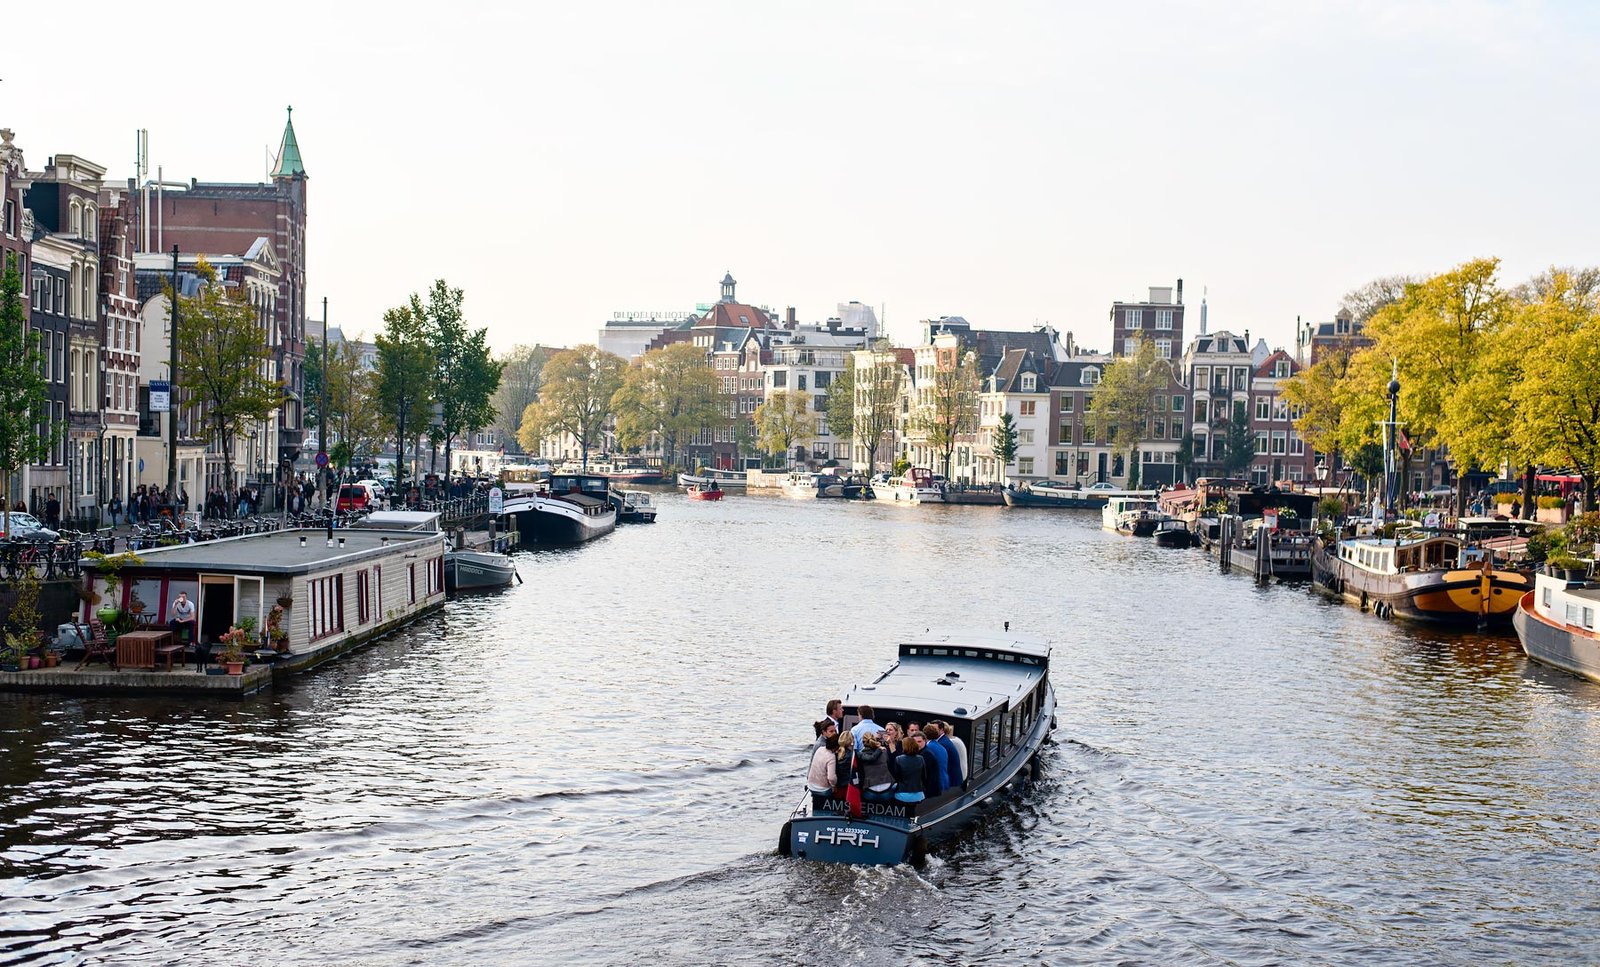 My 5 new favorite places in Amsterdam